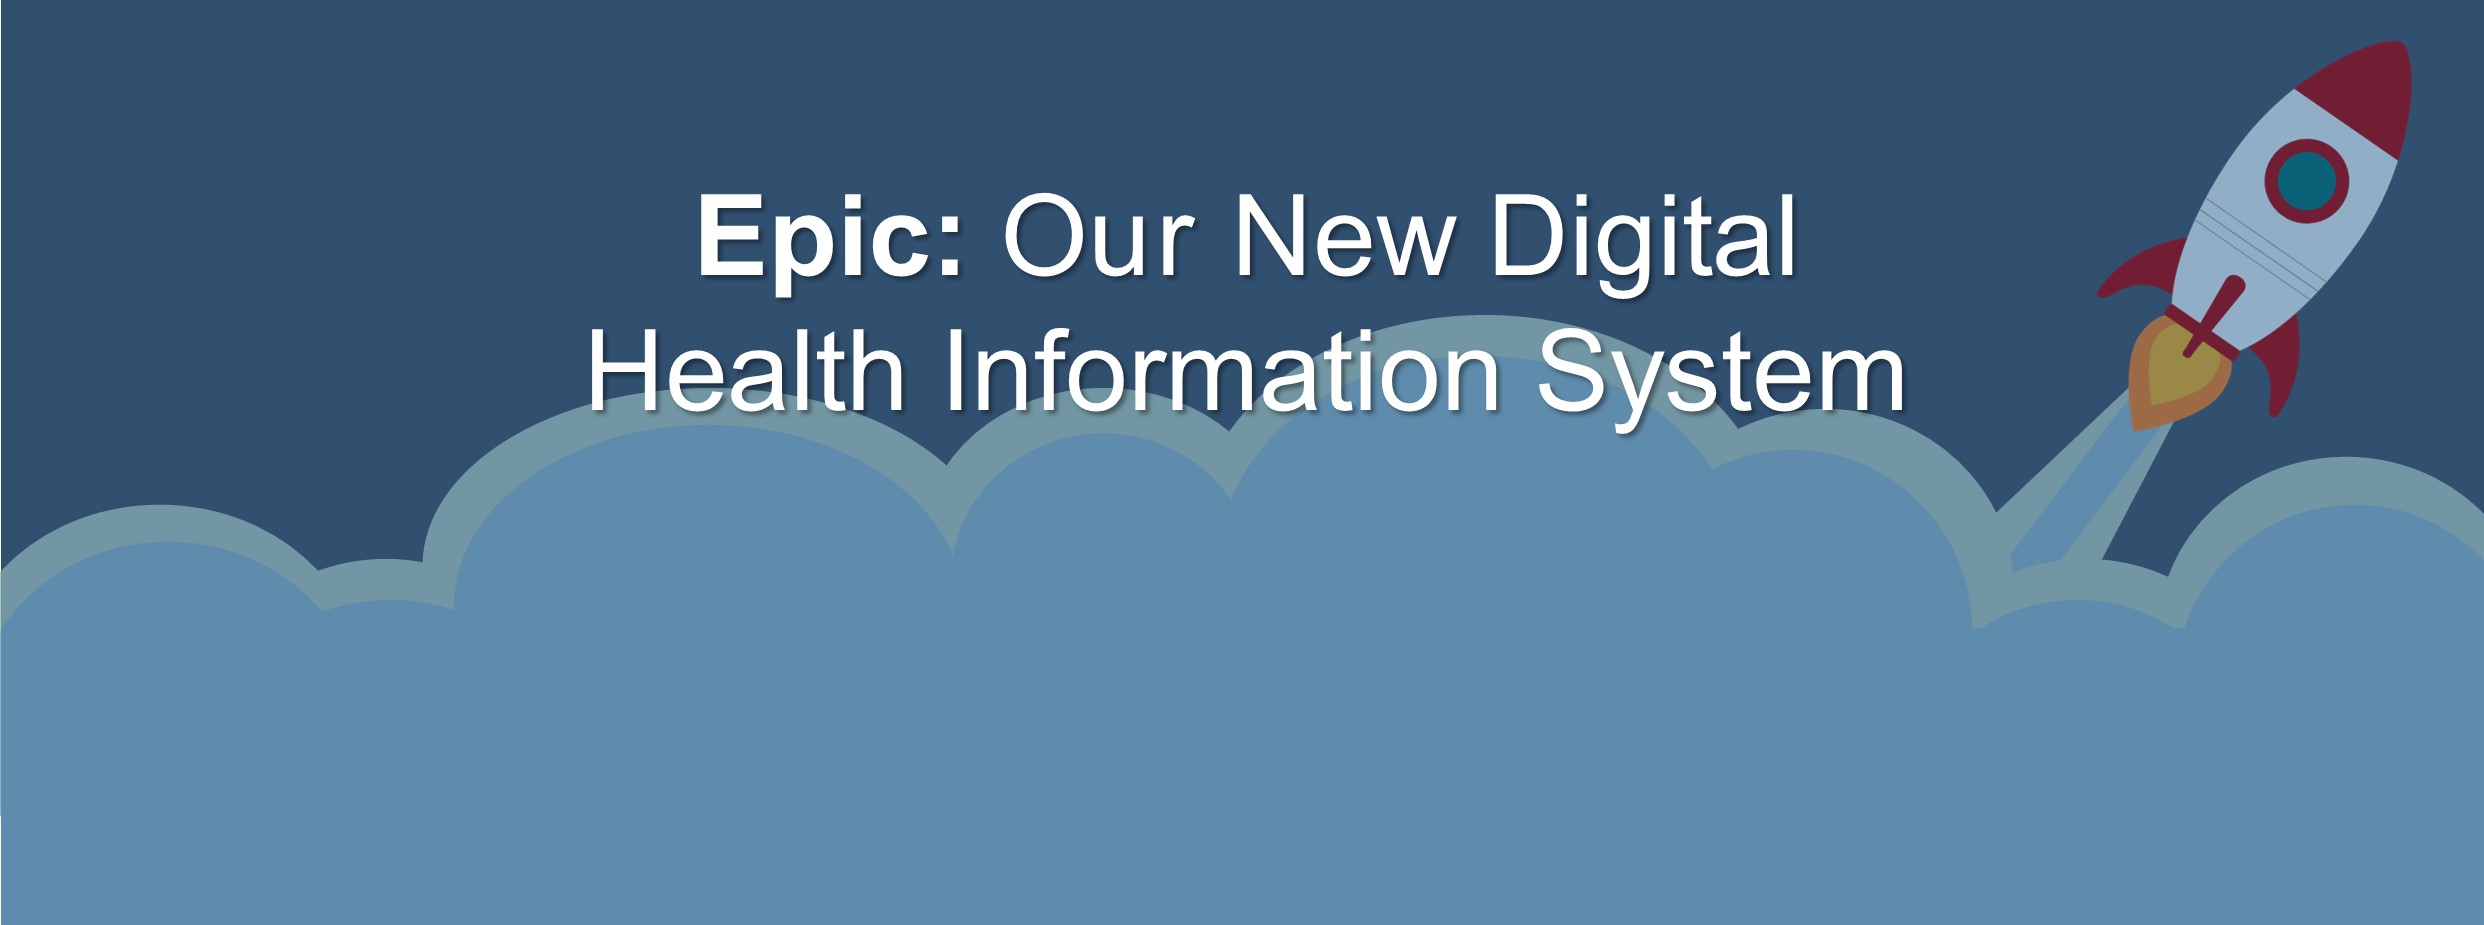 Epic: Our New Digital Health Information System